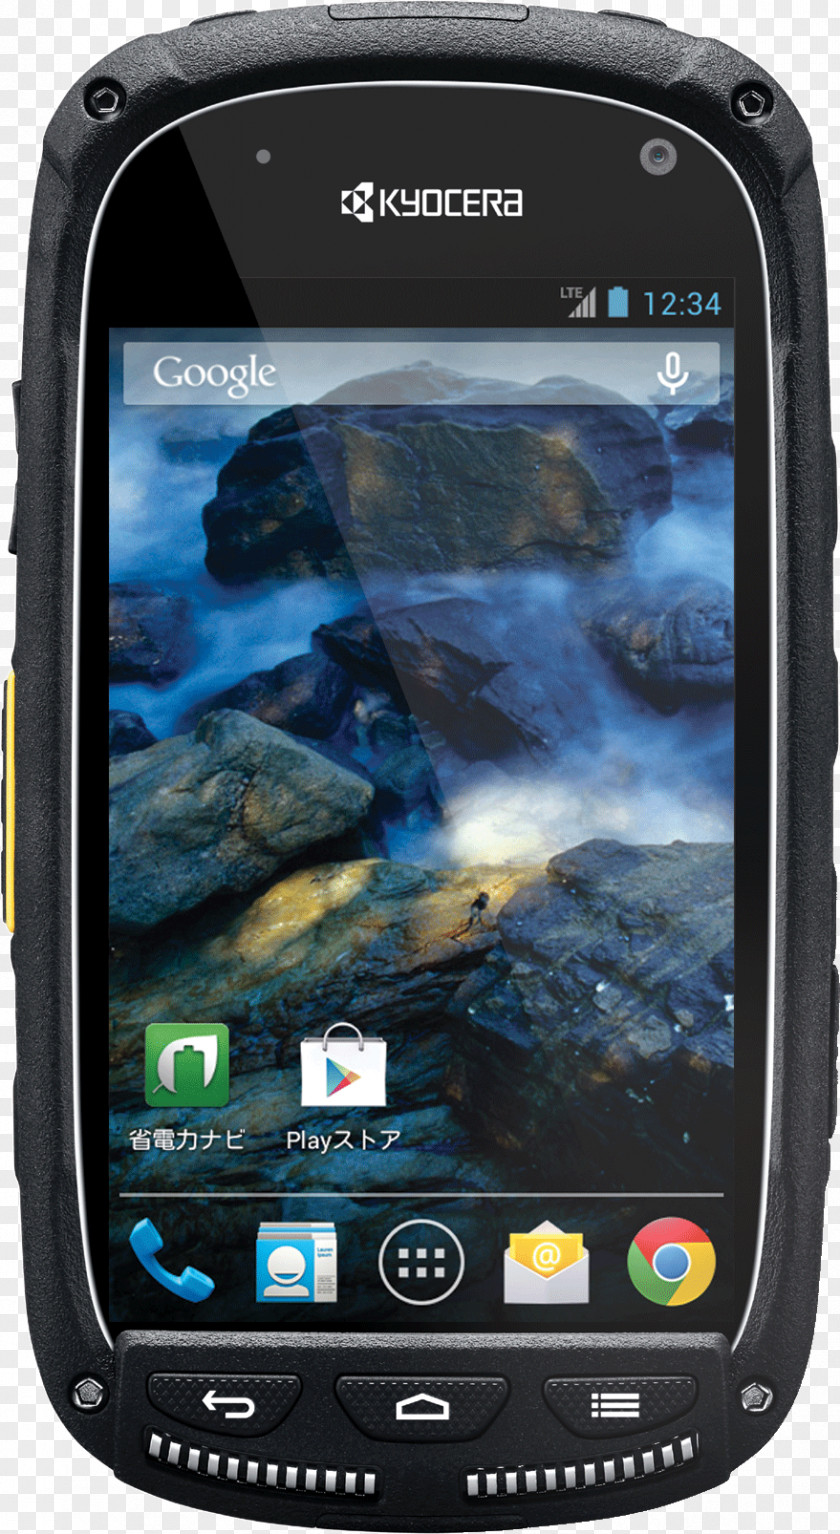 Smartphone Kyocera Hydro Product Manuals Torque PNG